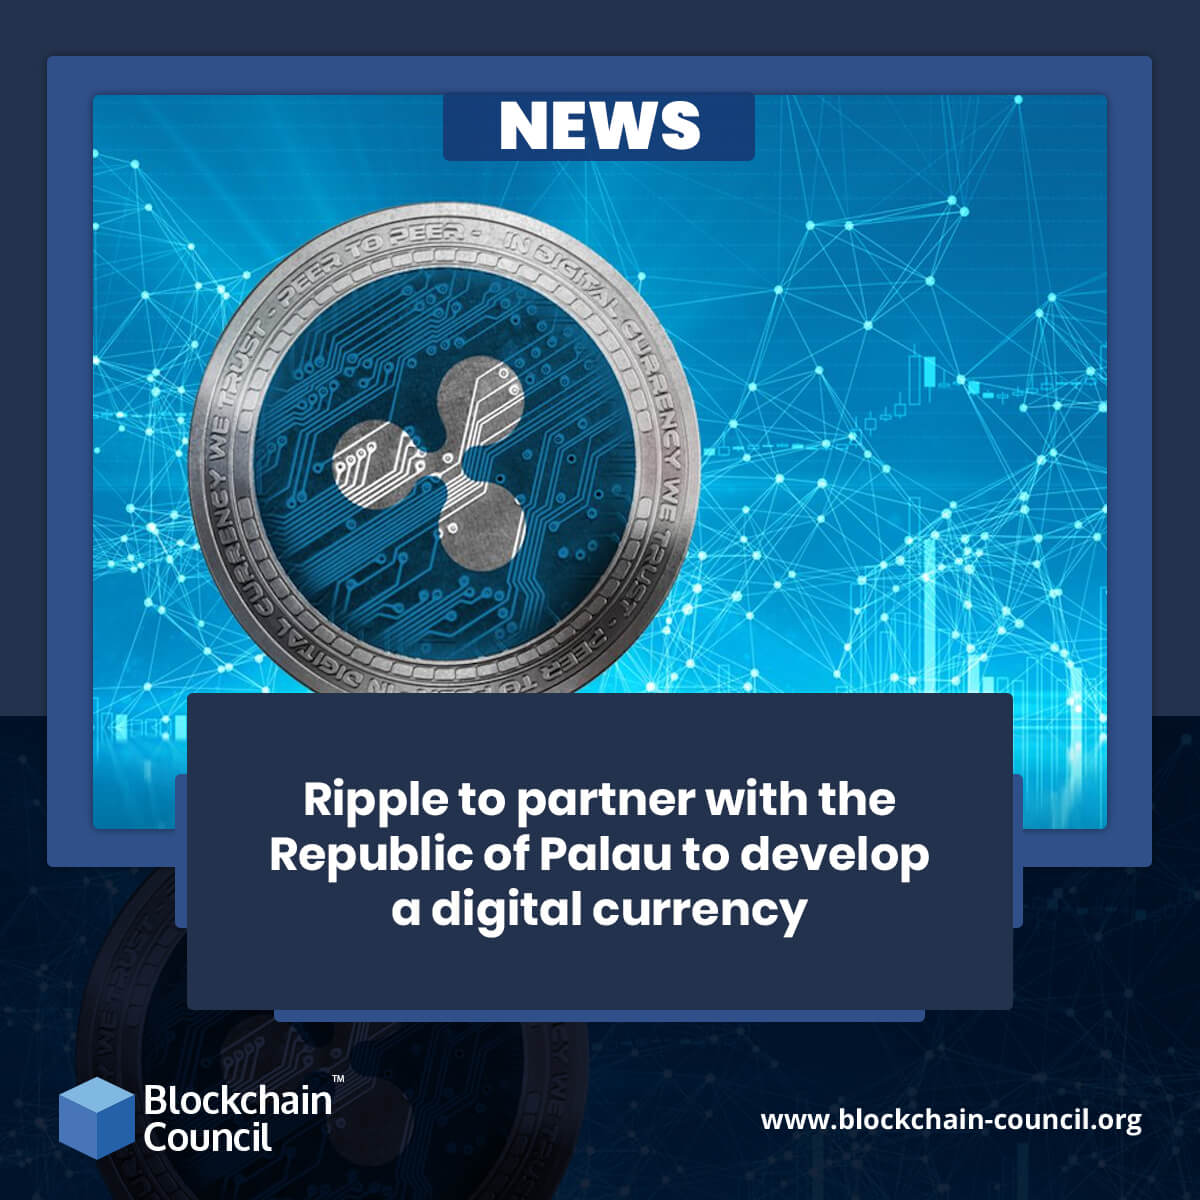 Ripple to partner with the Republic of Palau to develop a digital currency